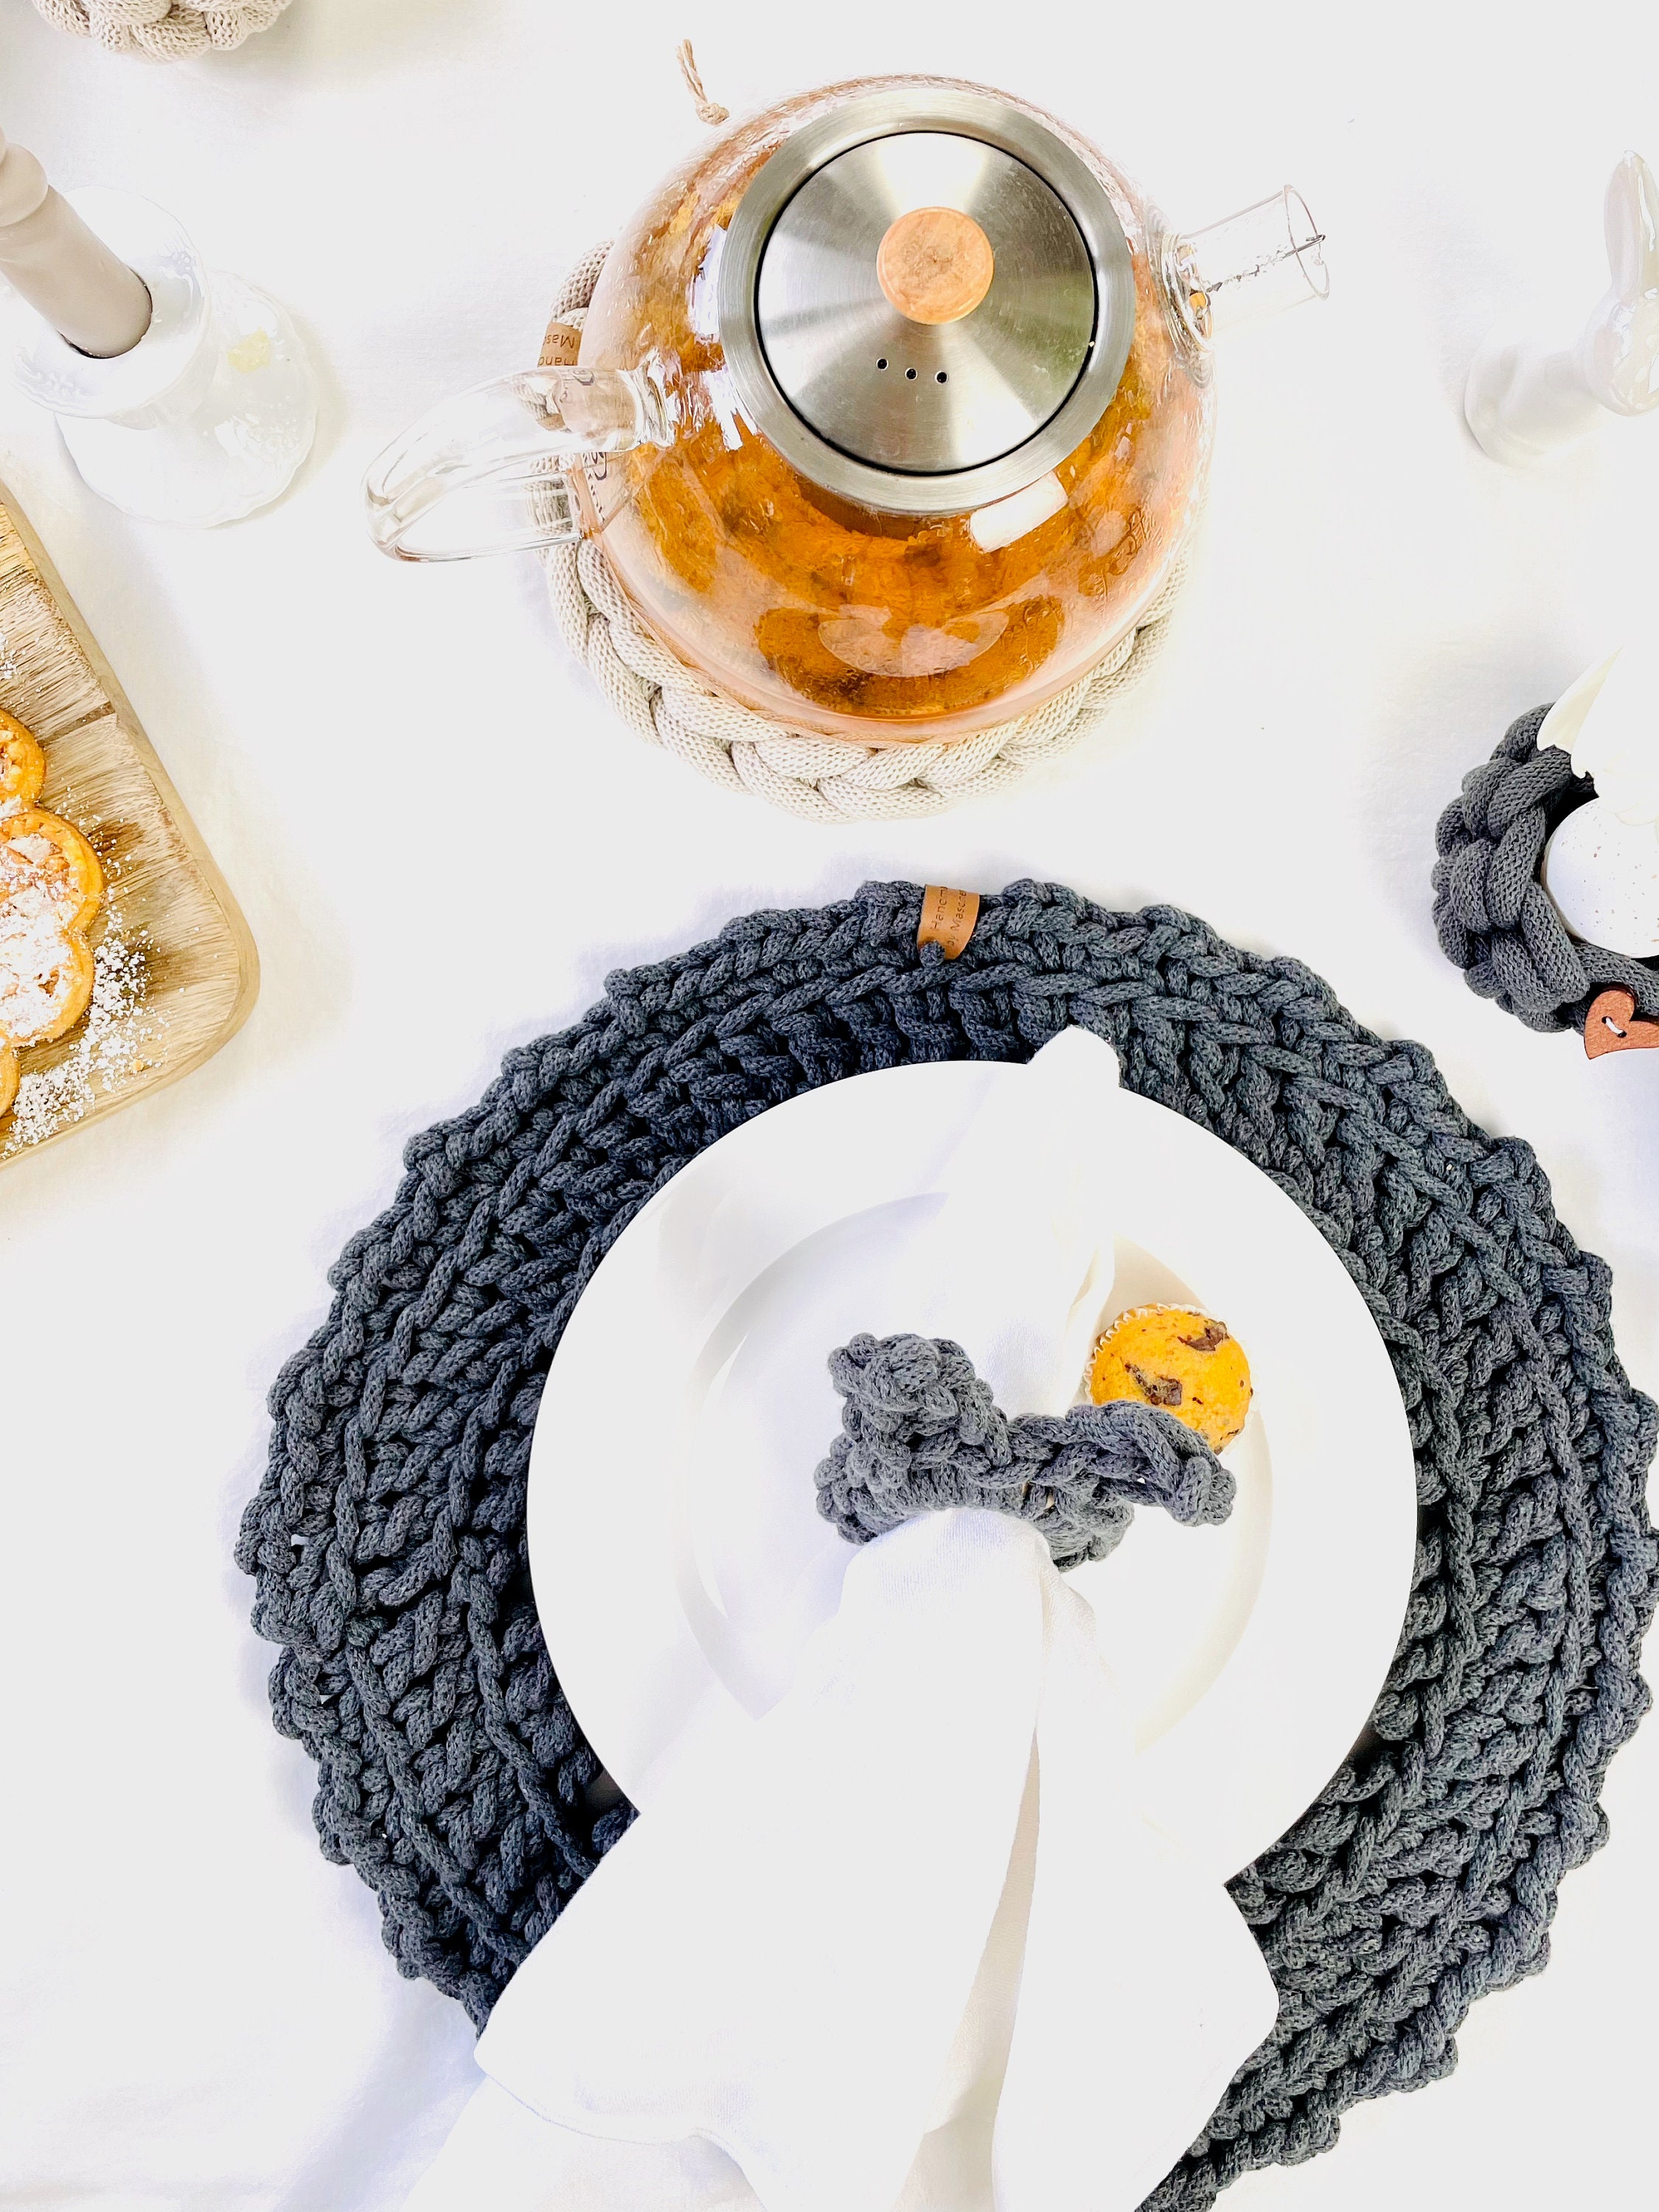 MAHINA - High-quality crochet lids for your DIY project - discover